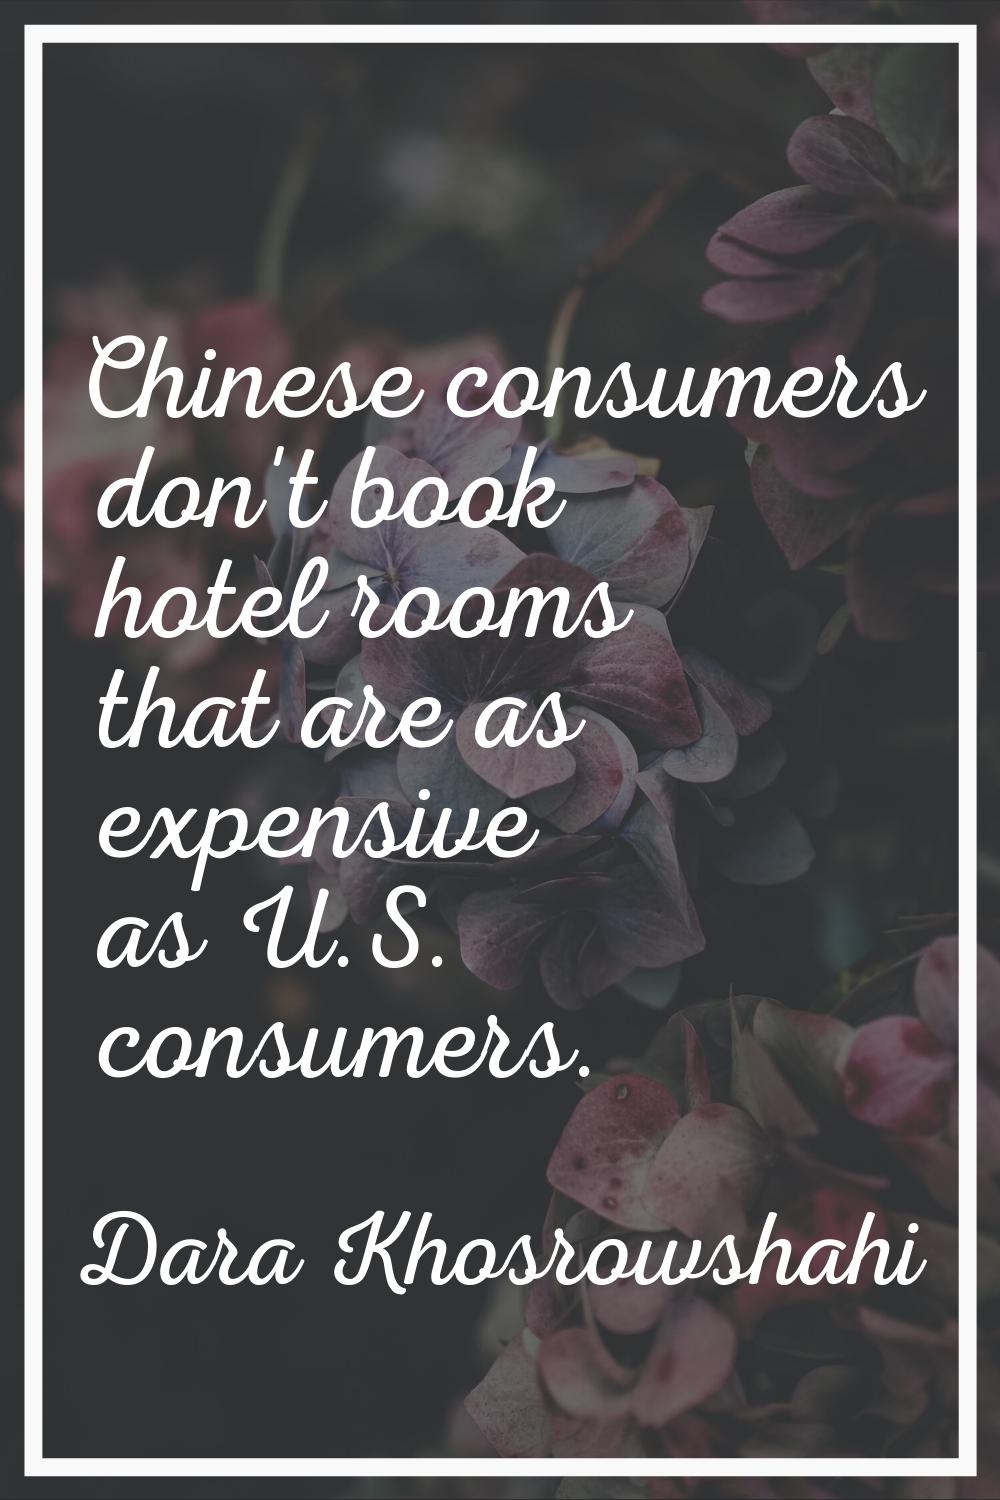 Chinese consumers don't book hotel rooms that are as expensive as U.S. consumers.